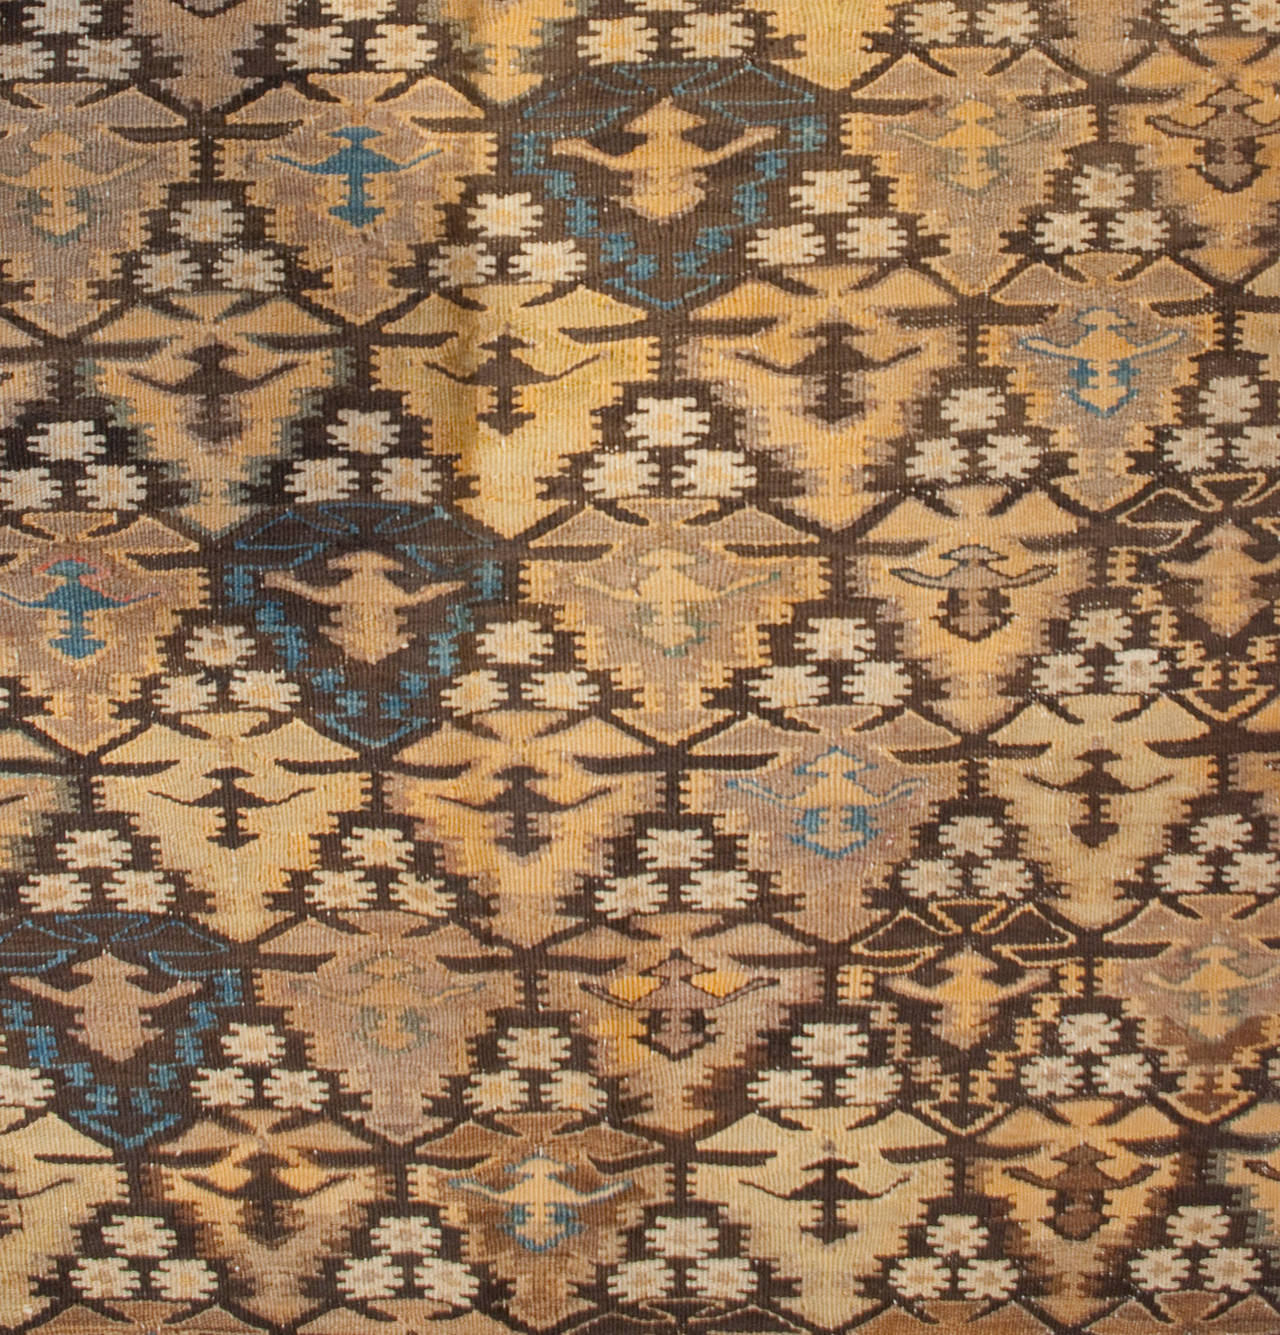 An early 20th century Persian Qazvin Kilim runner with an all-over tree-of-life pattern surrounded by multiple complementary geometric borders.